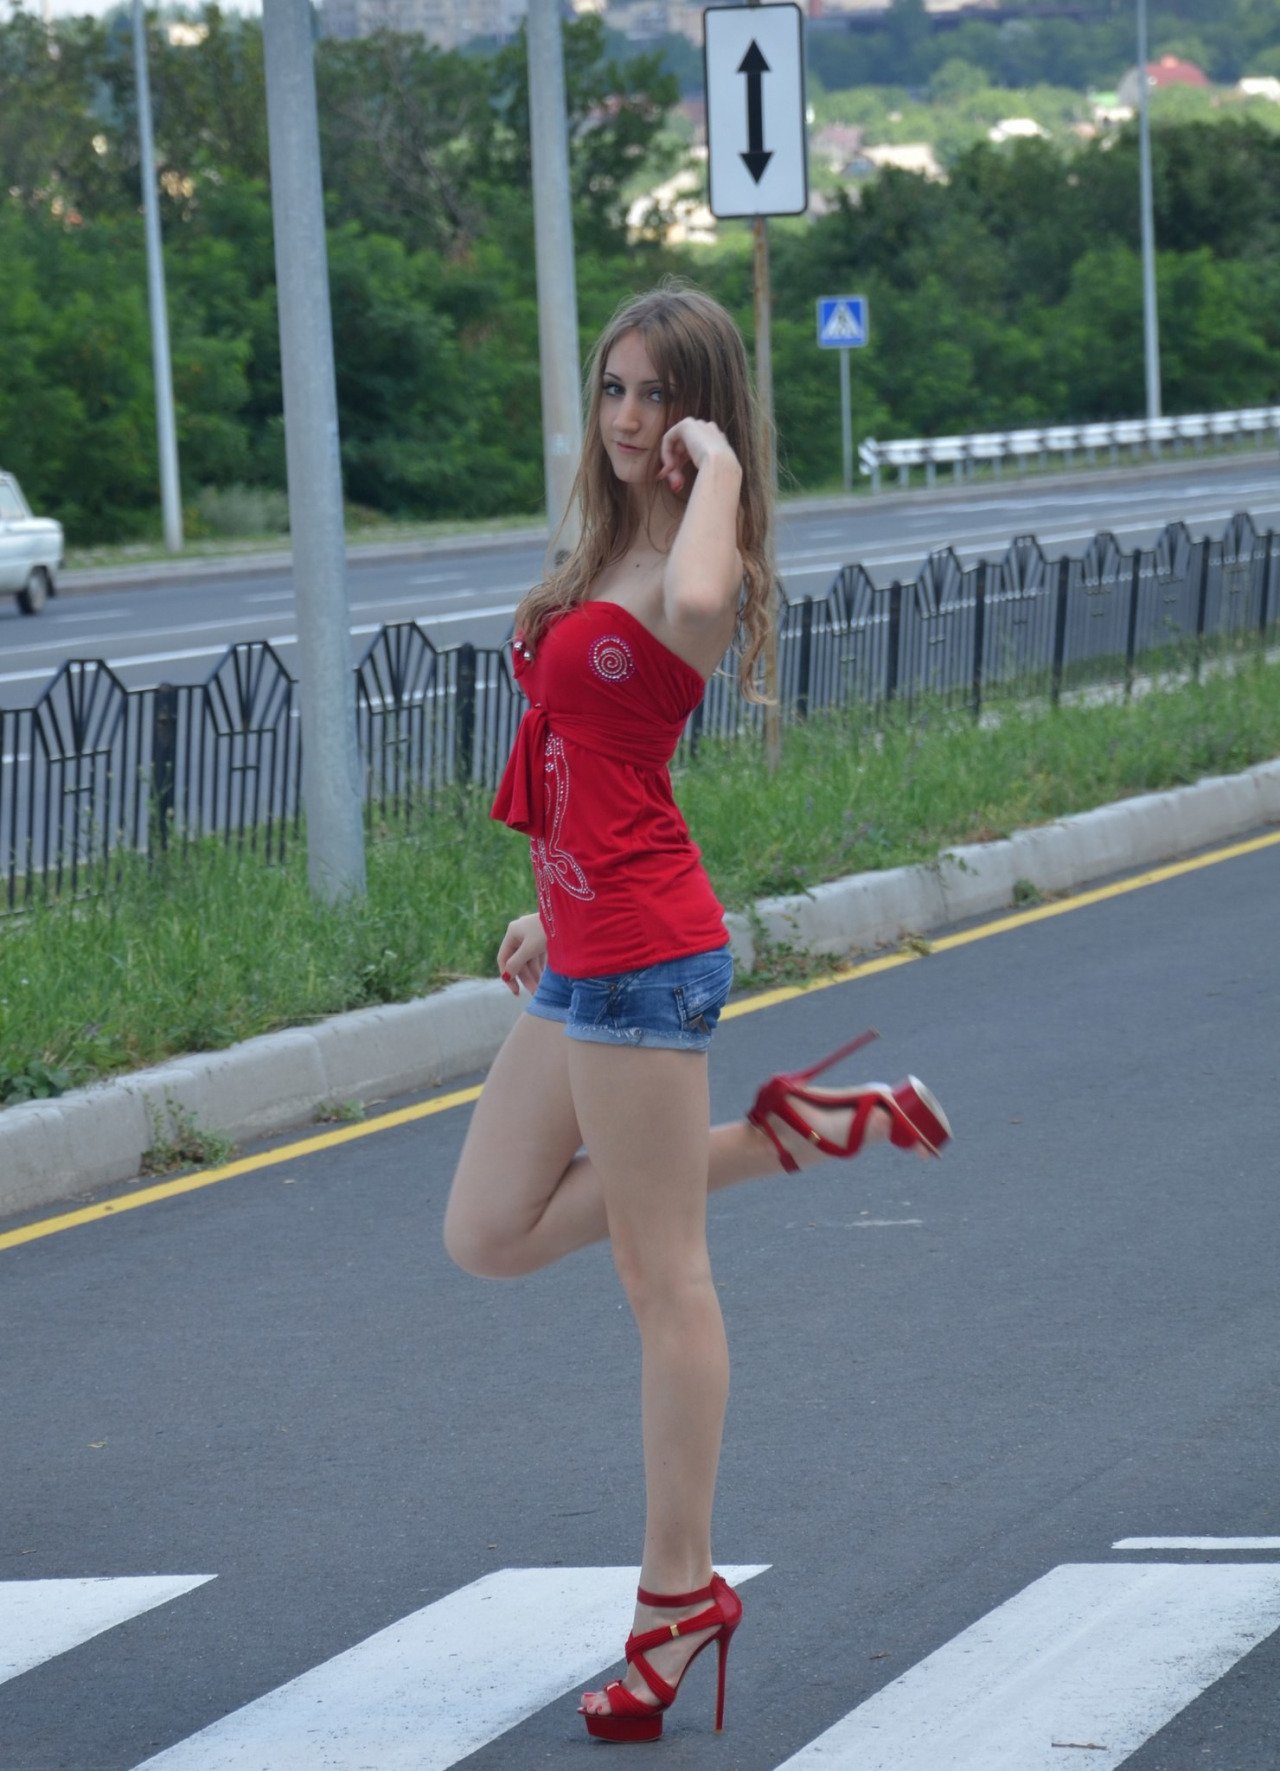 Girls In High Heels On Twitter Teen Girl In Denim Shorts And Red